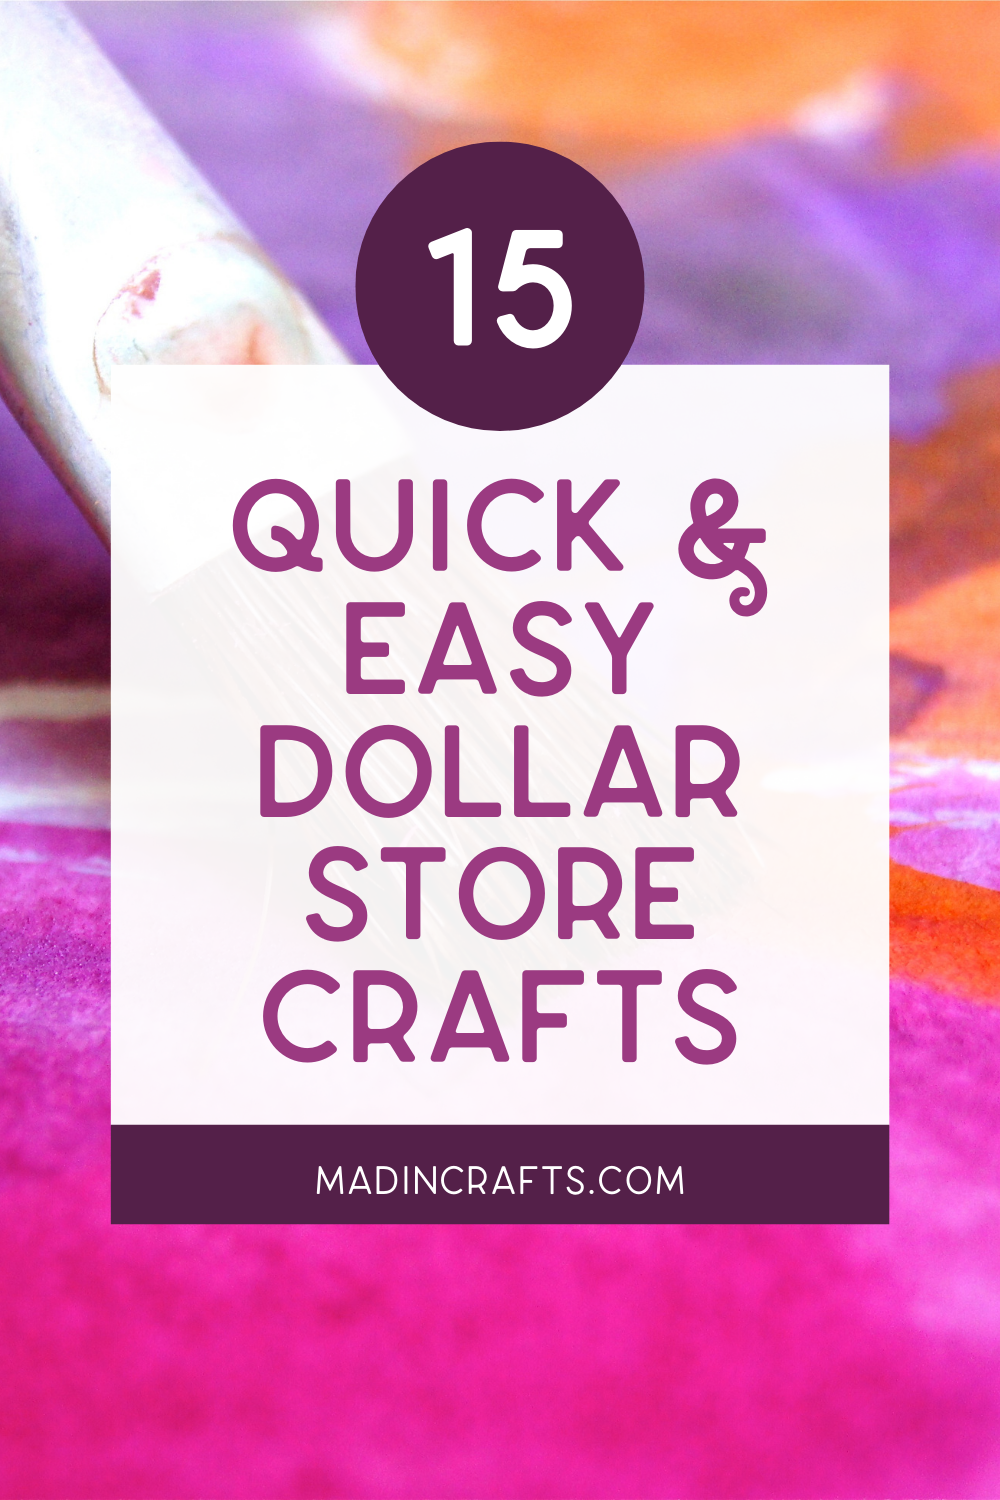 colorful graphic that reads "15 Quick & Easy Dollar Store Crafts"